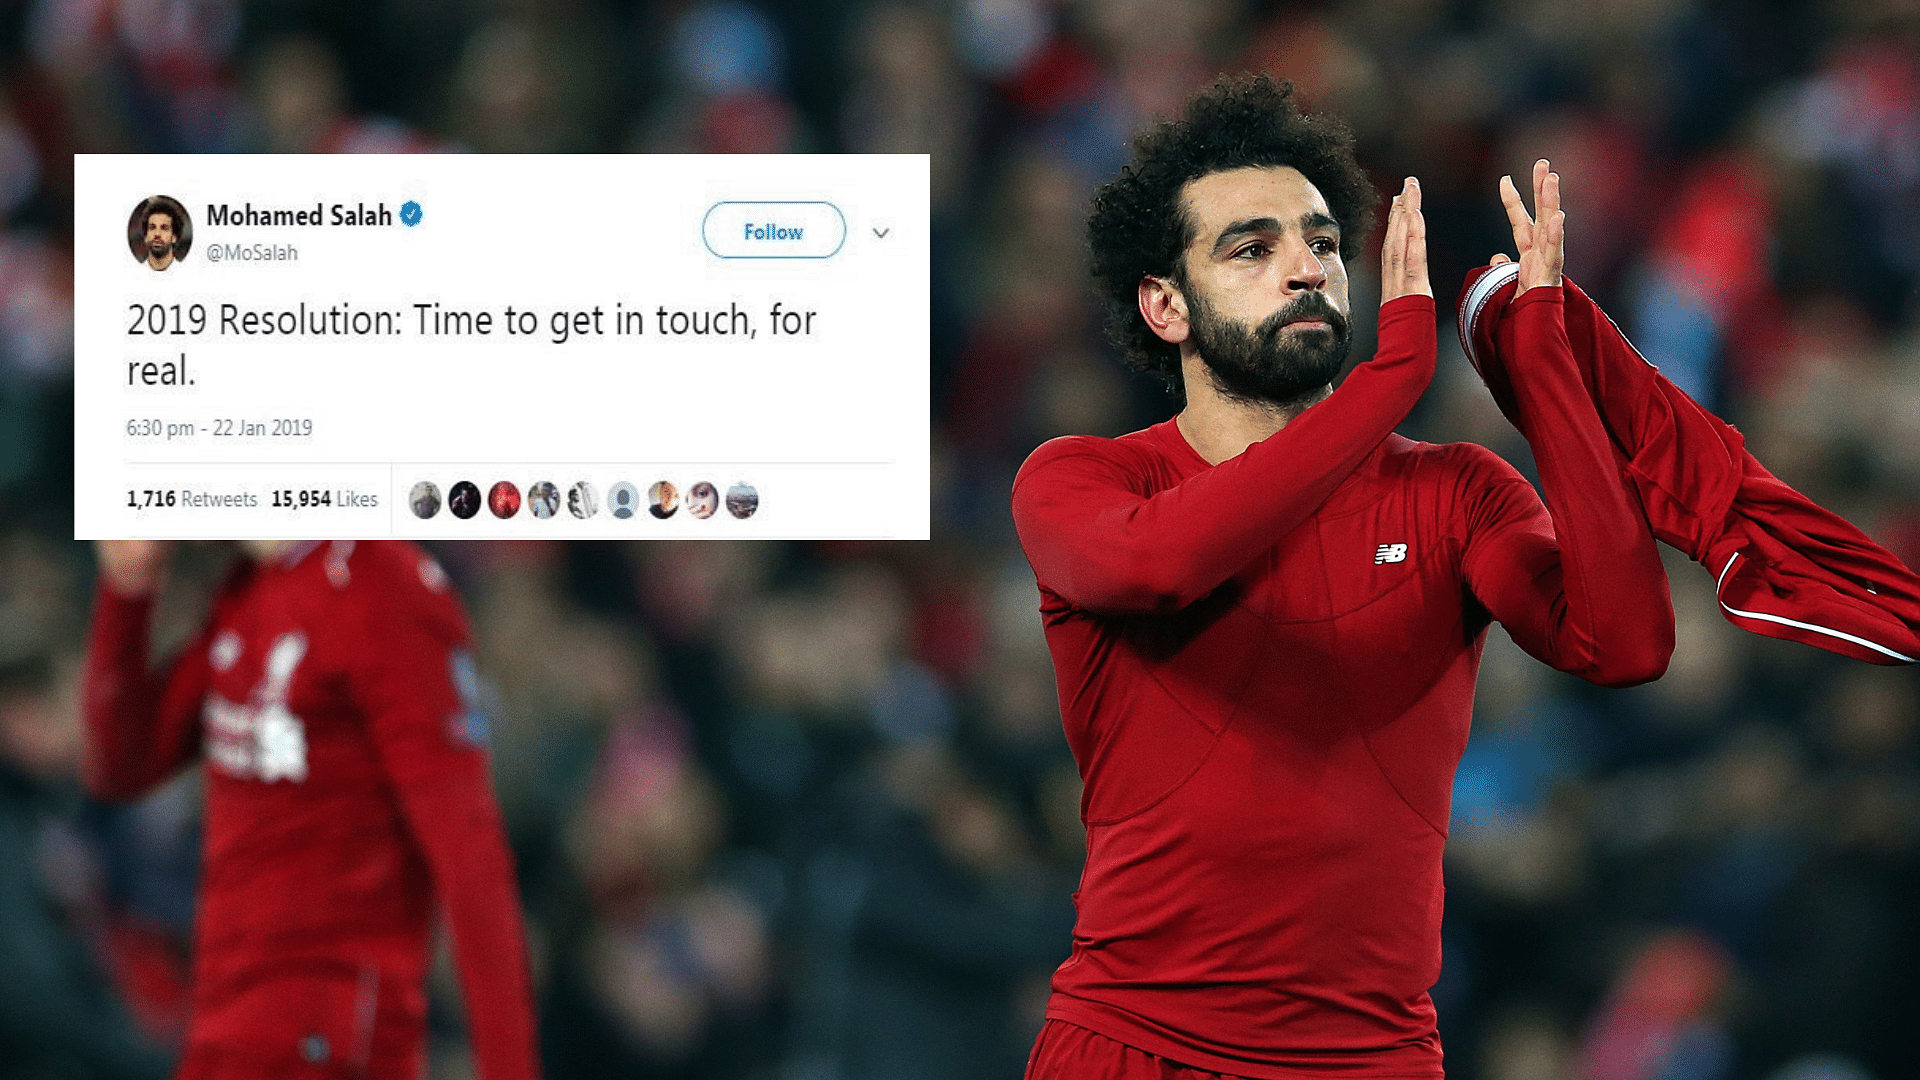 Mohamed Salah deleted his Twitter and Instagram pages after posting a cryptic tweet on 22 January.